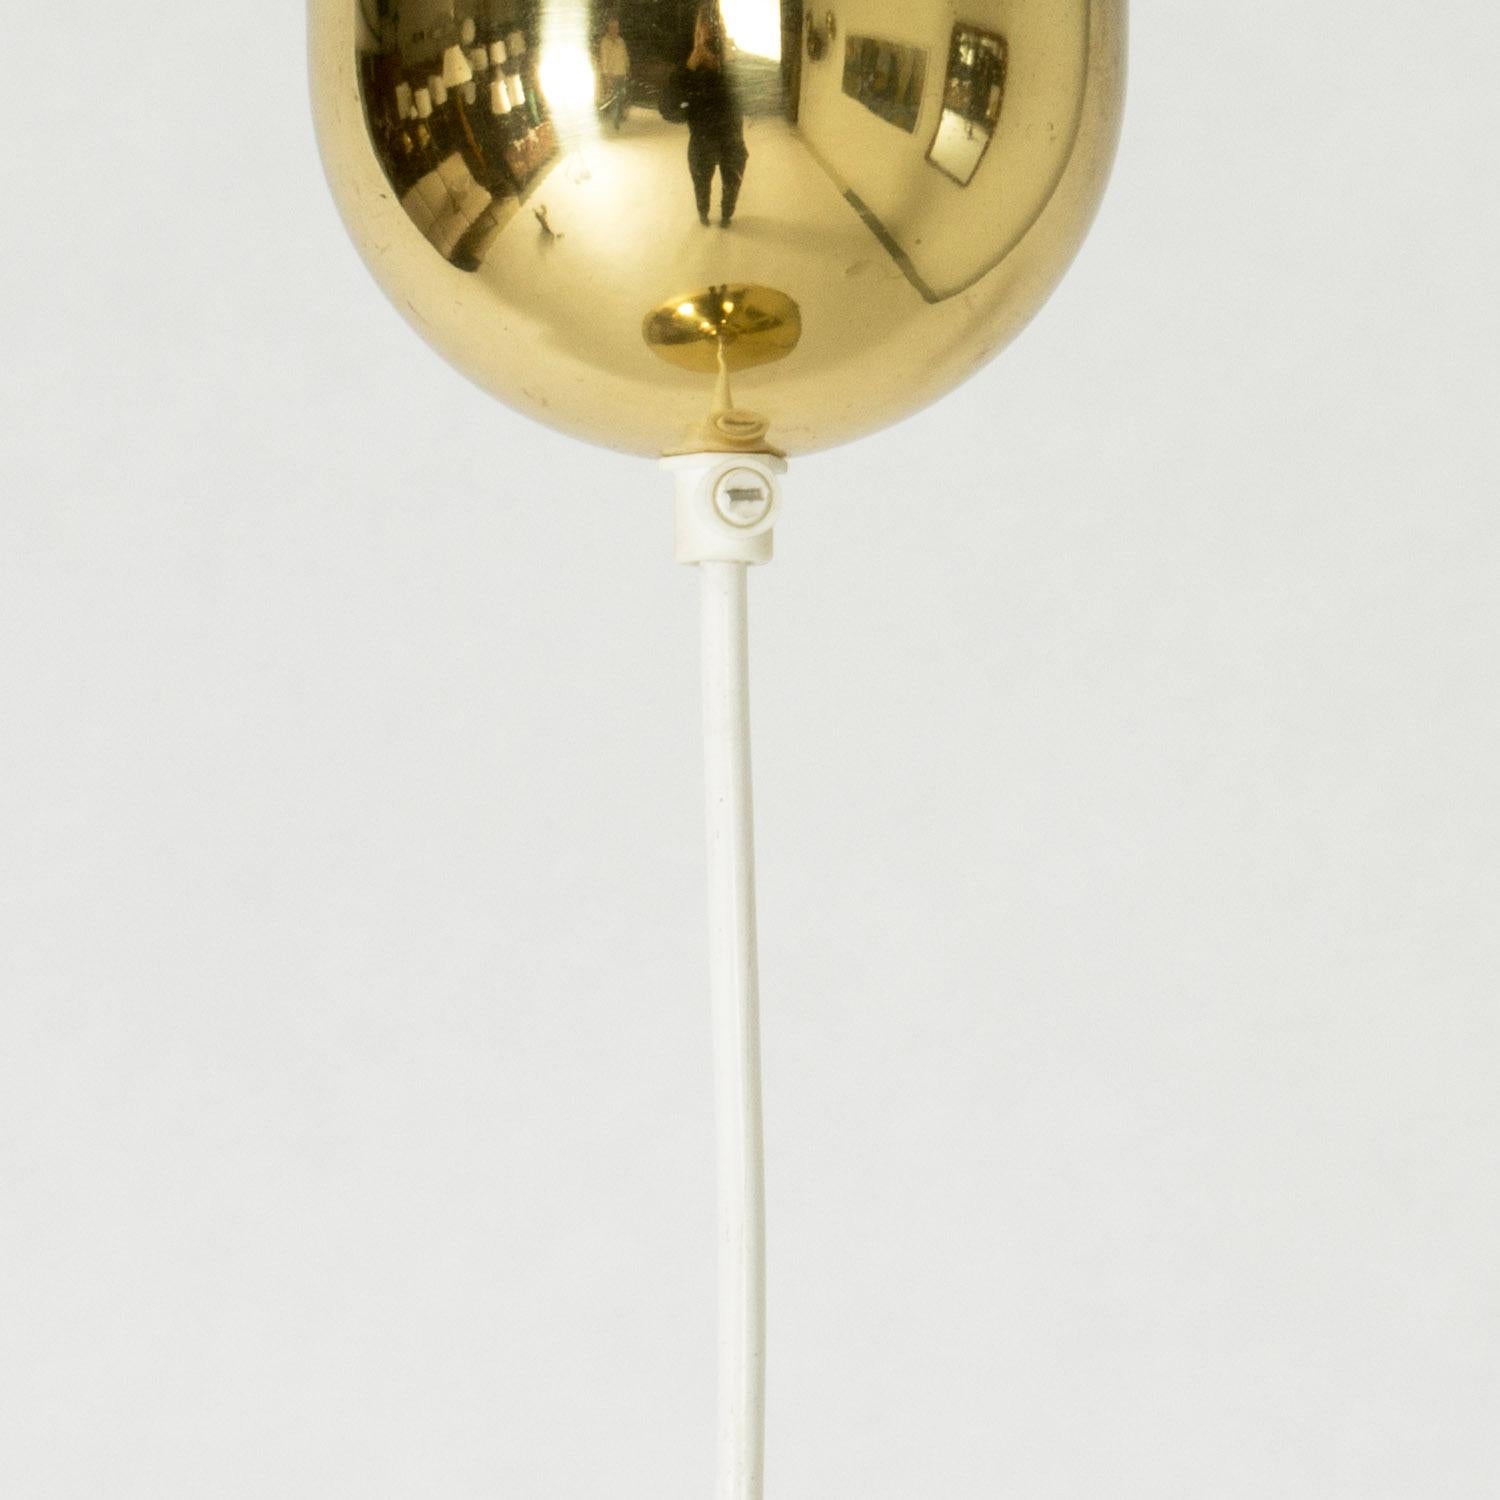 Mid-20th Century Midcentury Brass Pendant Lamp by Lisa Johansson-Pape, Orno, Finland, 1950s For Sale